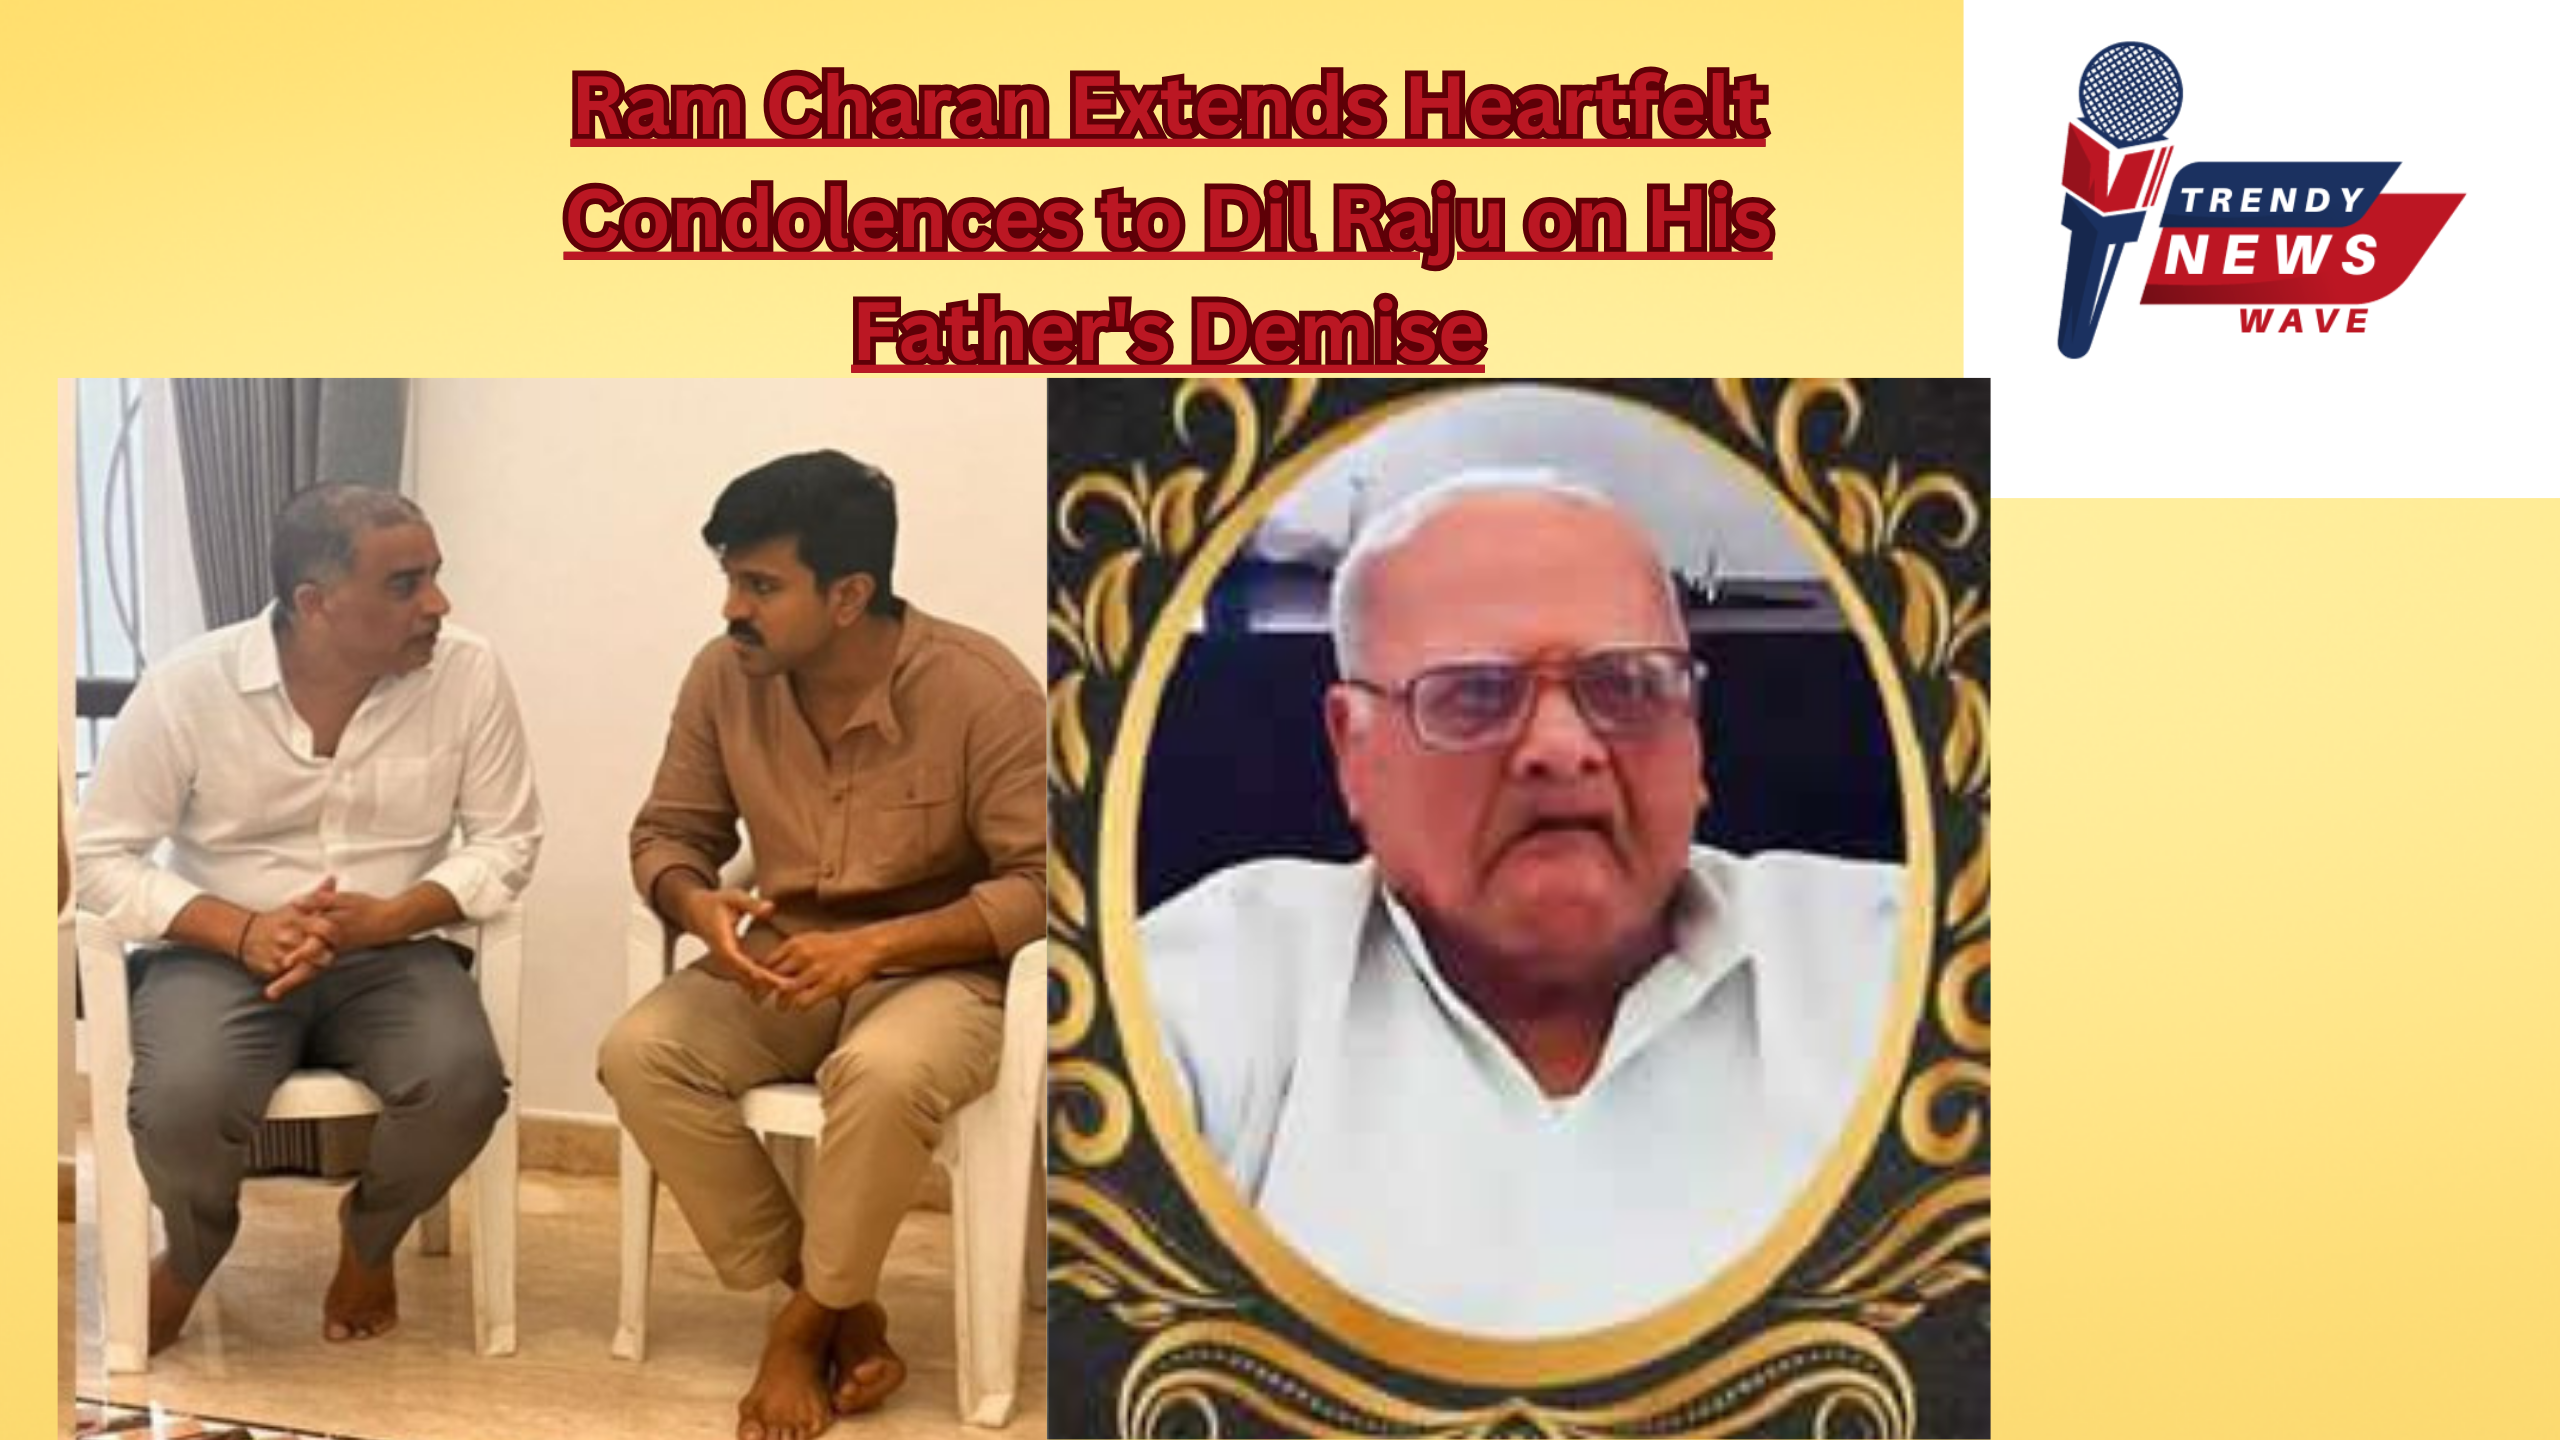 Ram Charan Extends Heartfelt Condolences to Dil Raju on His Father's Demise